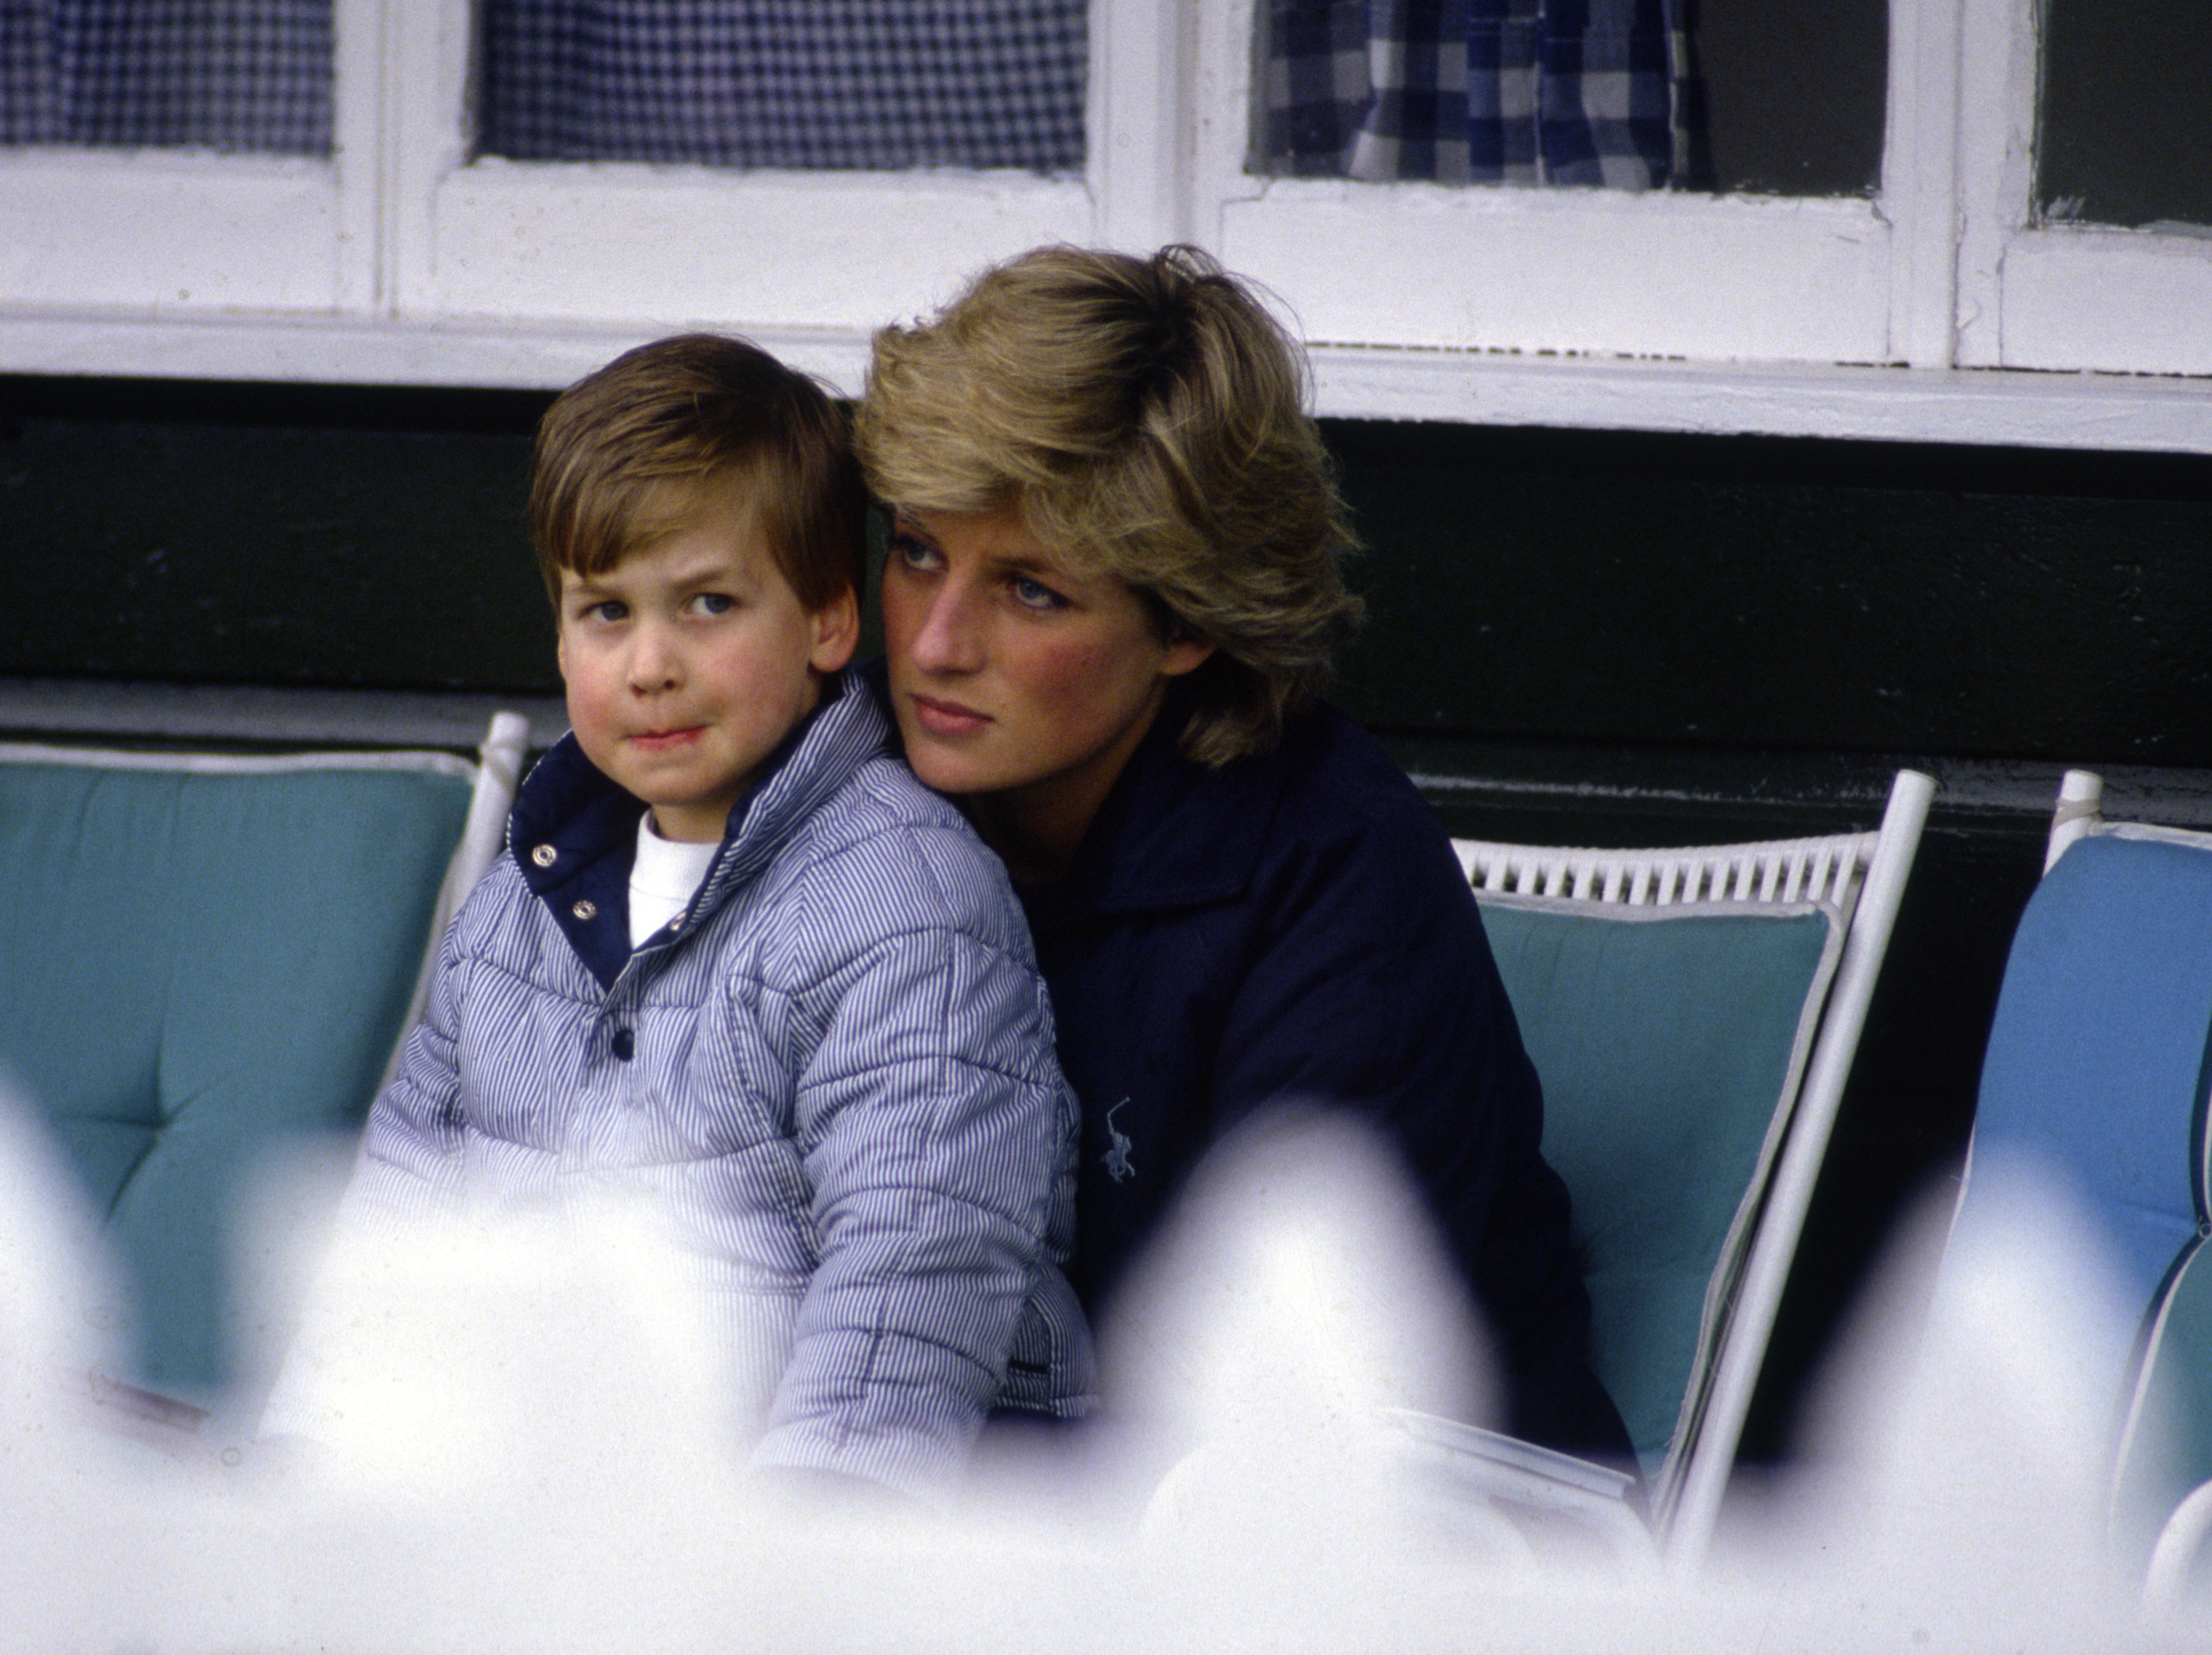 Prince William At Guards Polo Club Being Comforted By His Mother, Princess Diana. | Source: Getty Images